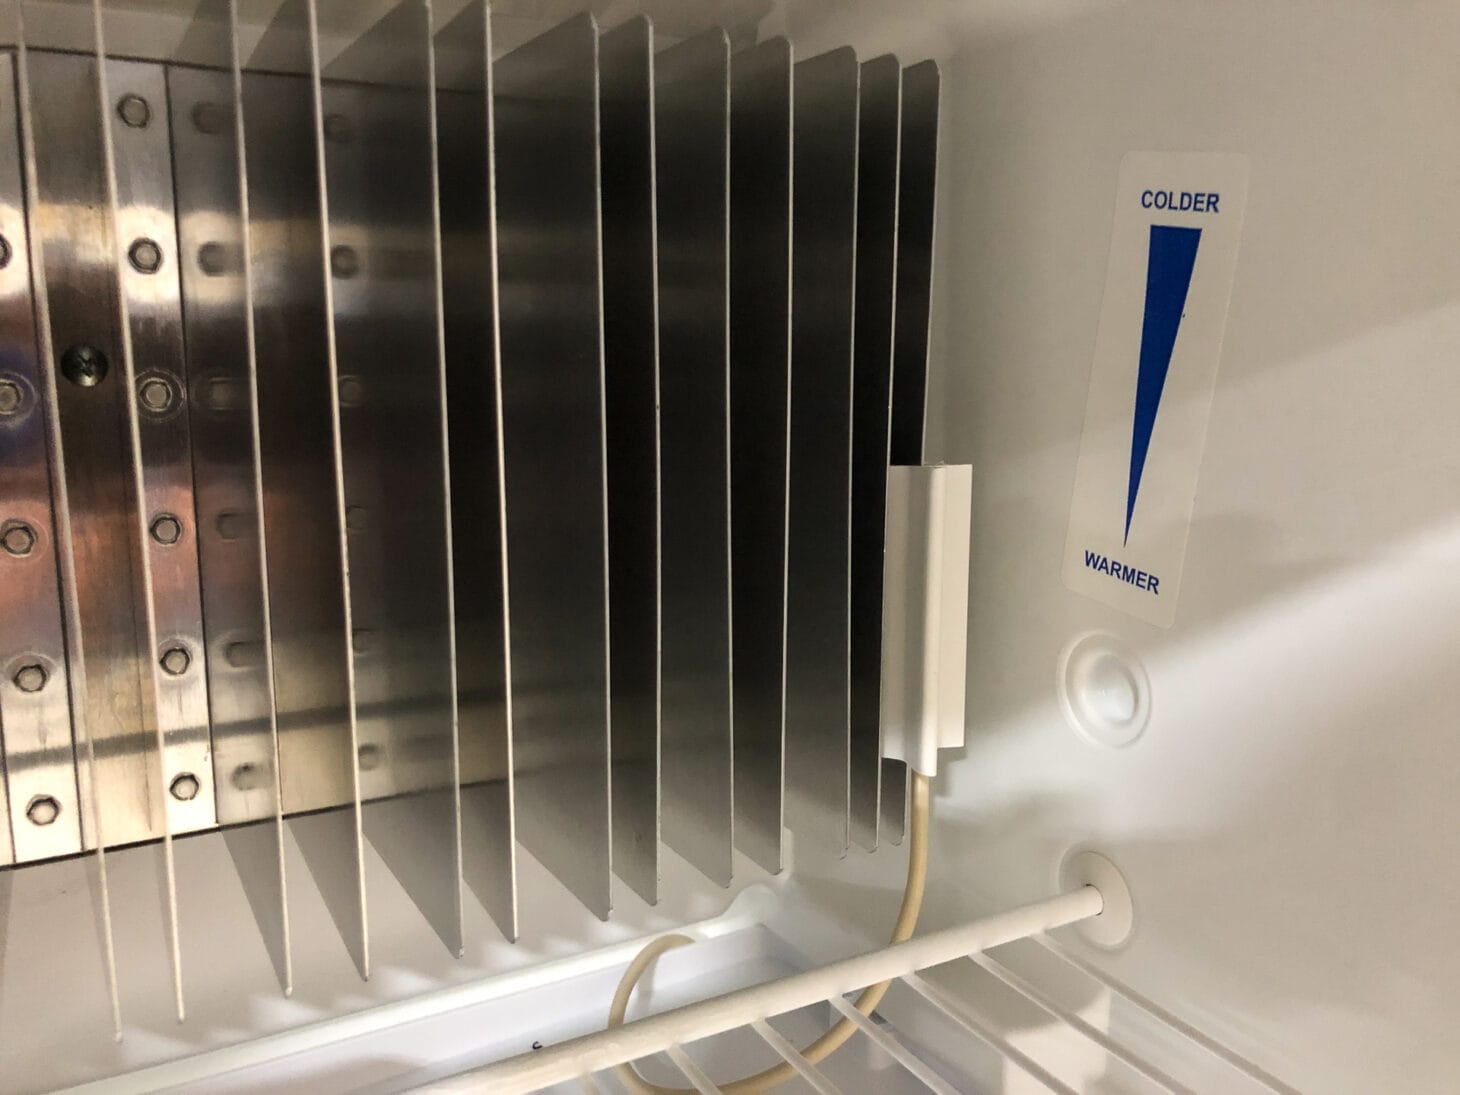 Thermistor and evaporator fins with label for "colder" and "warmer" in the back of an RV fridge